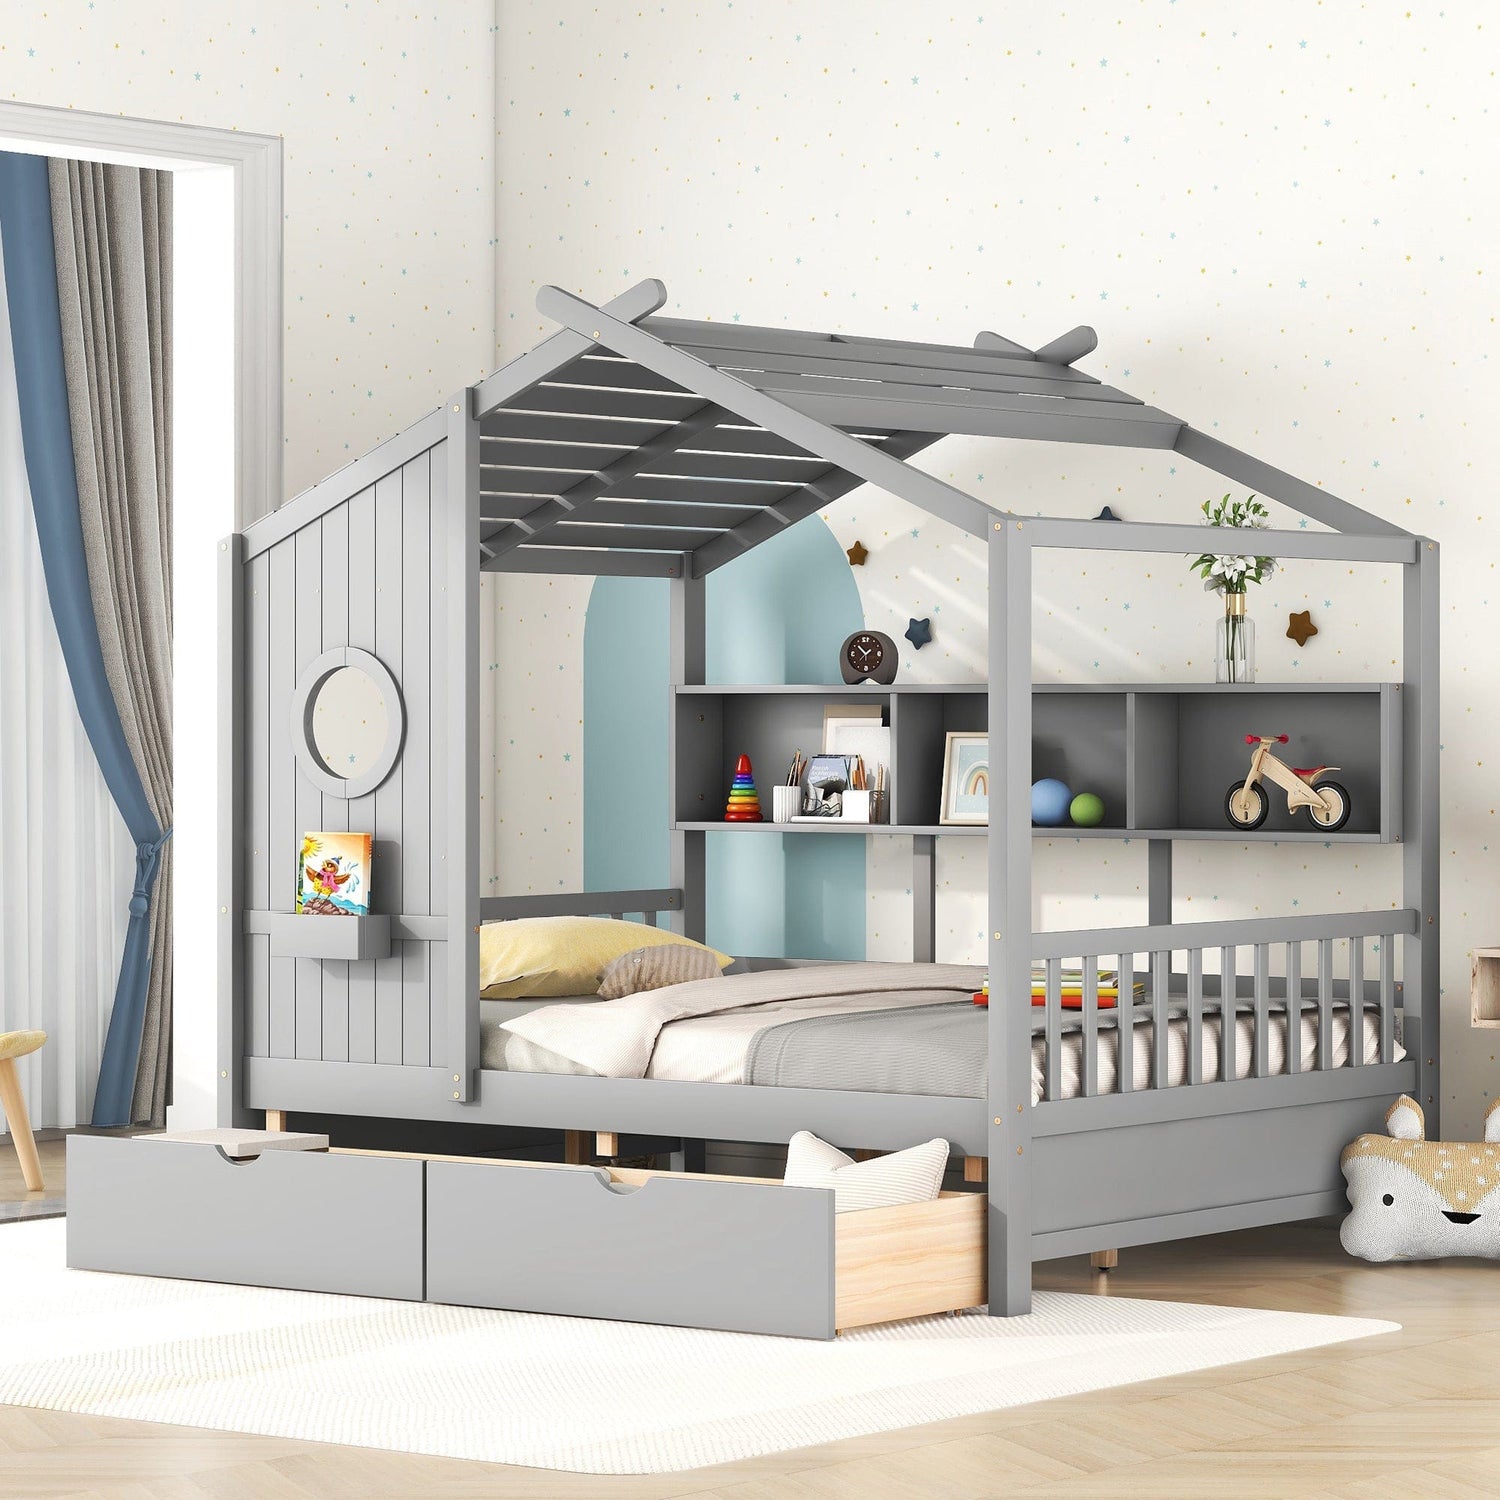 full-size-kids-bed-grey-house-bed